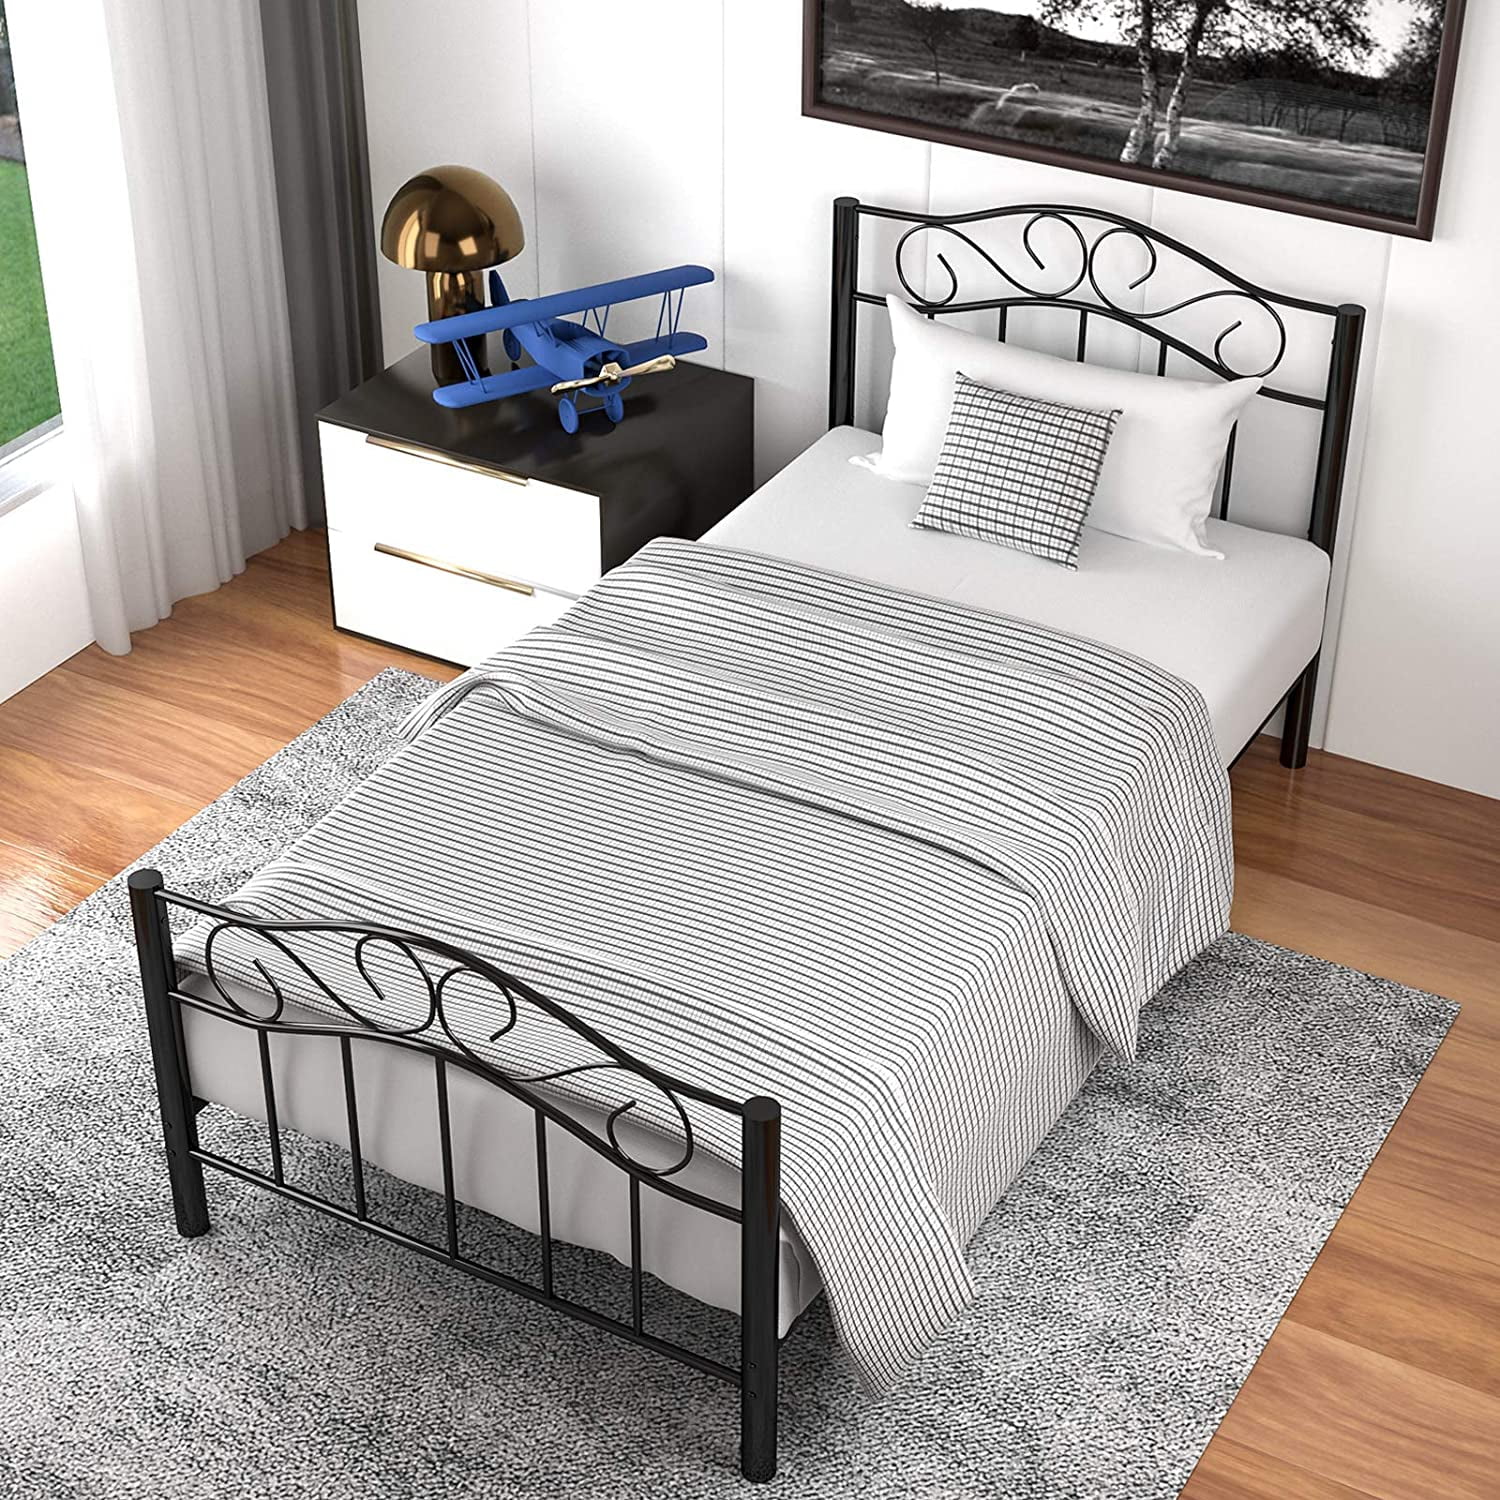 Mecor Twin Xl Curved Metal Bed Frame, Twin Xl Bed Foundation